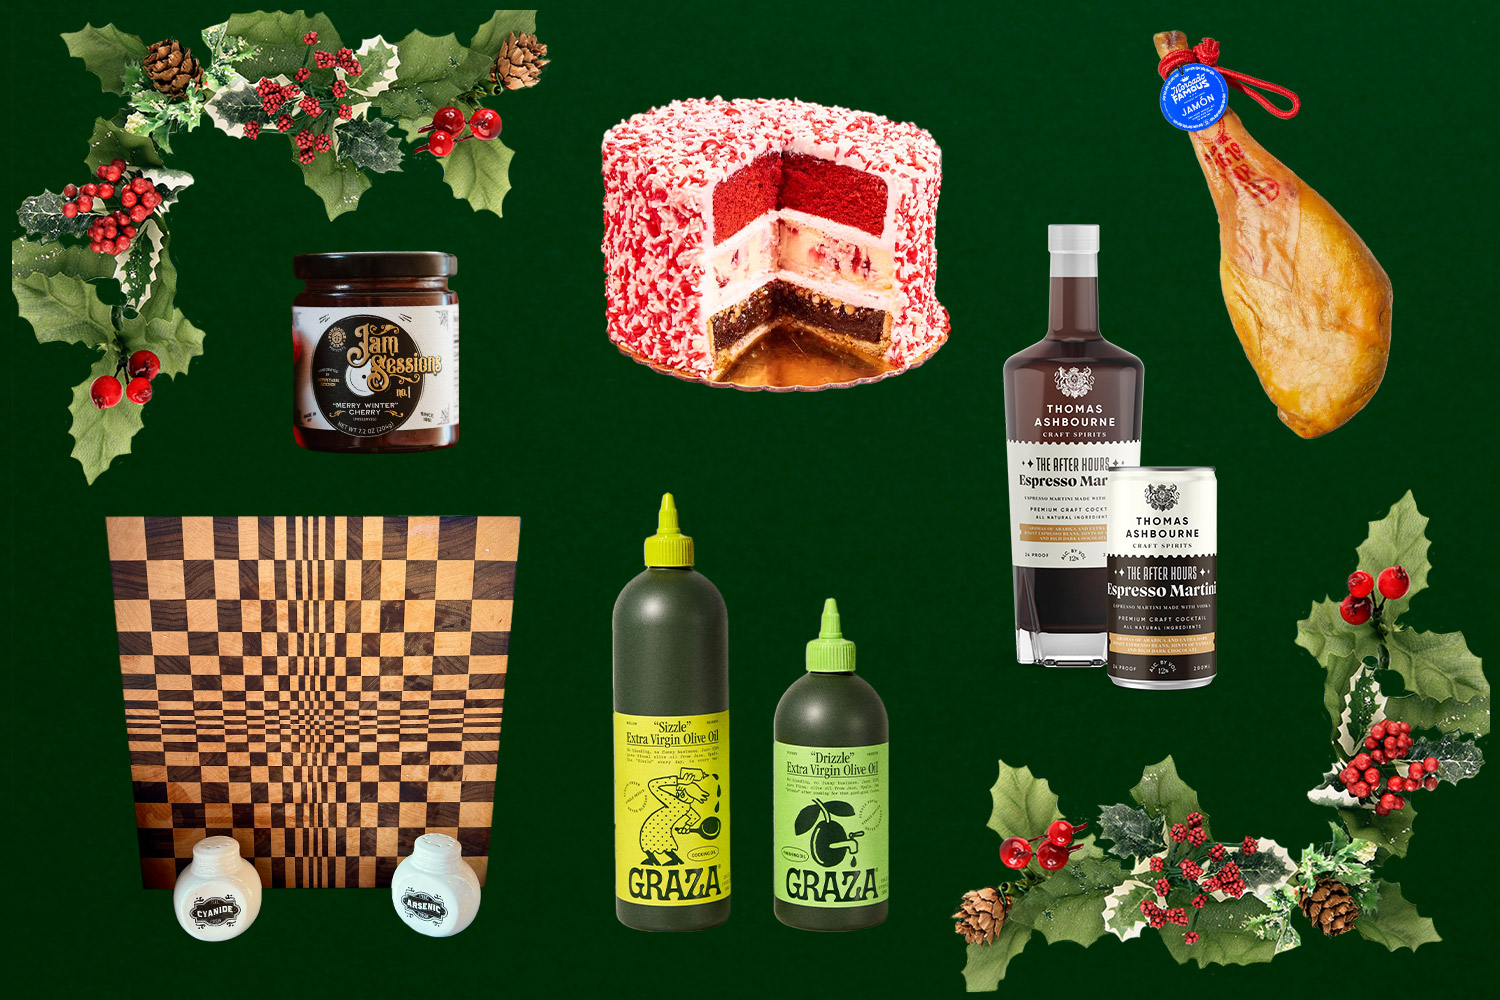 Various food and drink items including ham, espresso martini bottle, olive oil, cutting board, jam, and a cake on a green background